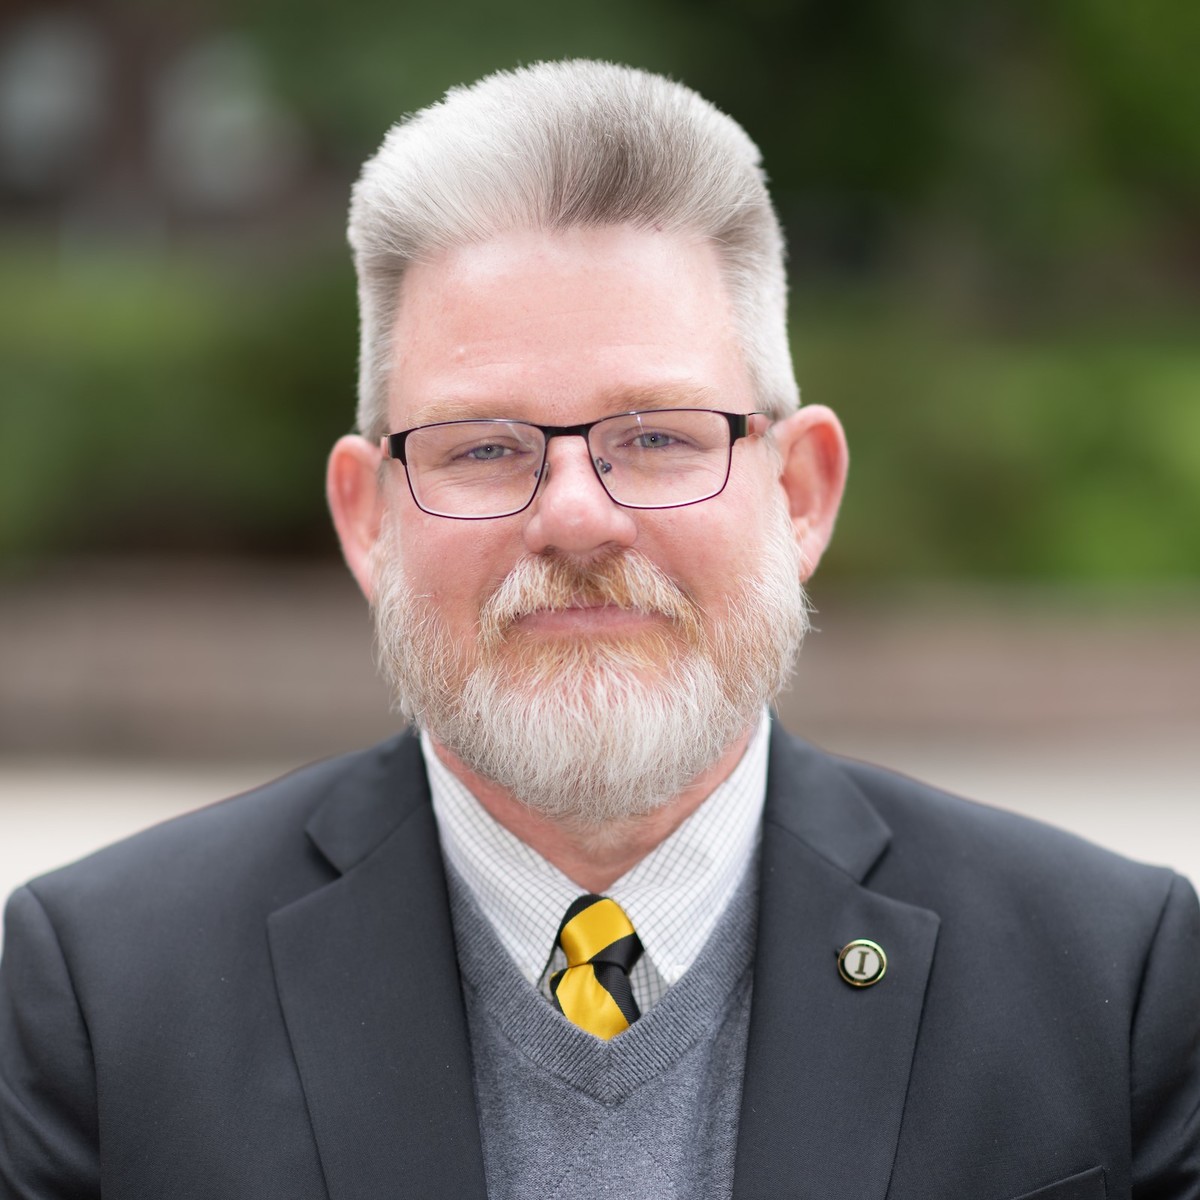 Blaine Eckles | Vice Provost for Student Affairs and Dean of Students